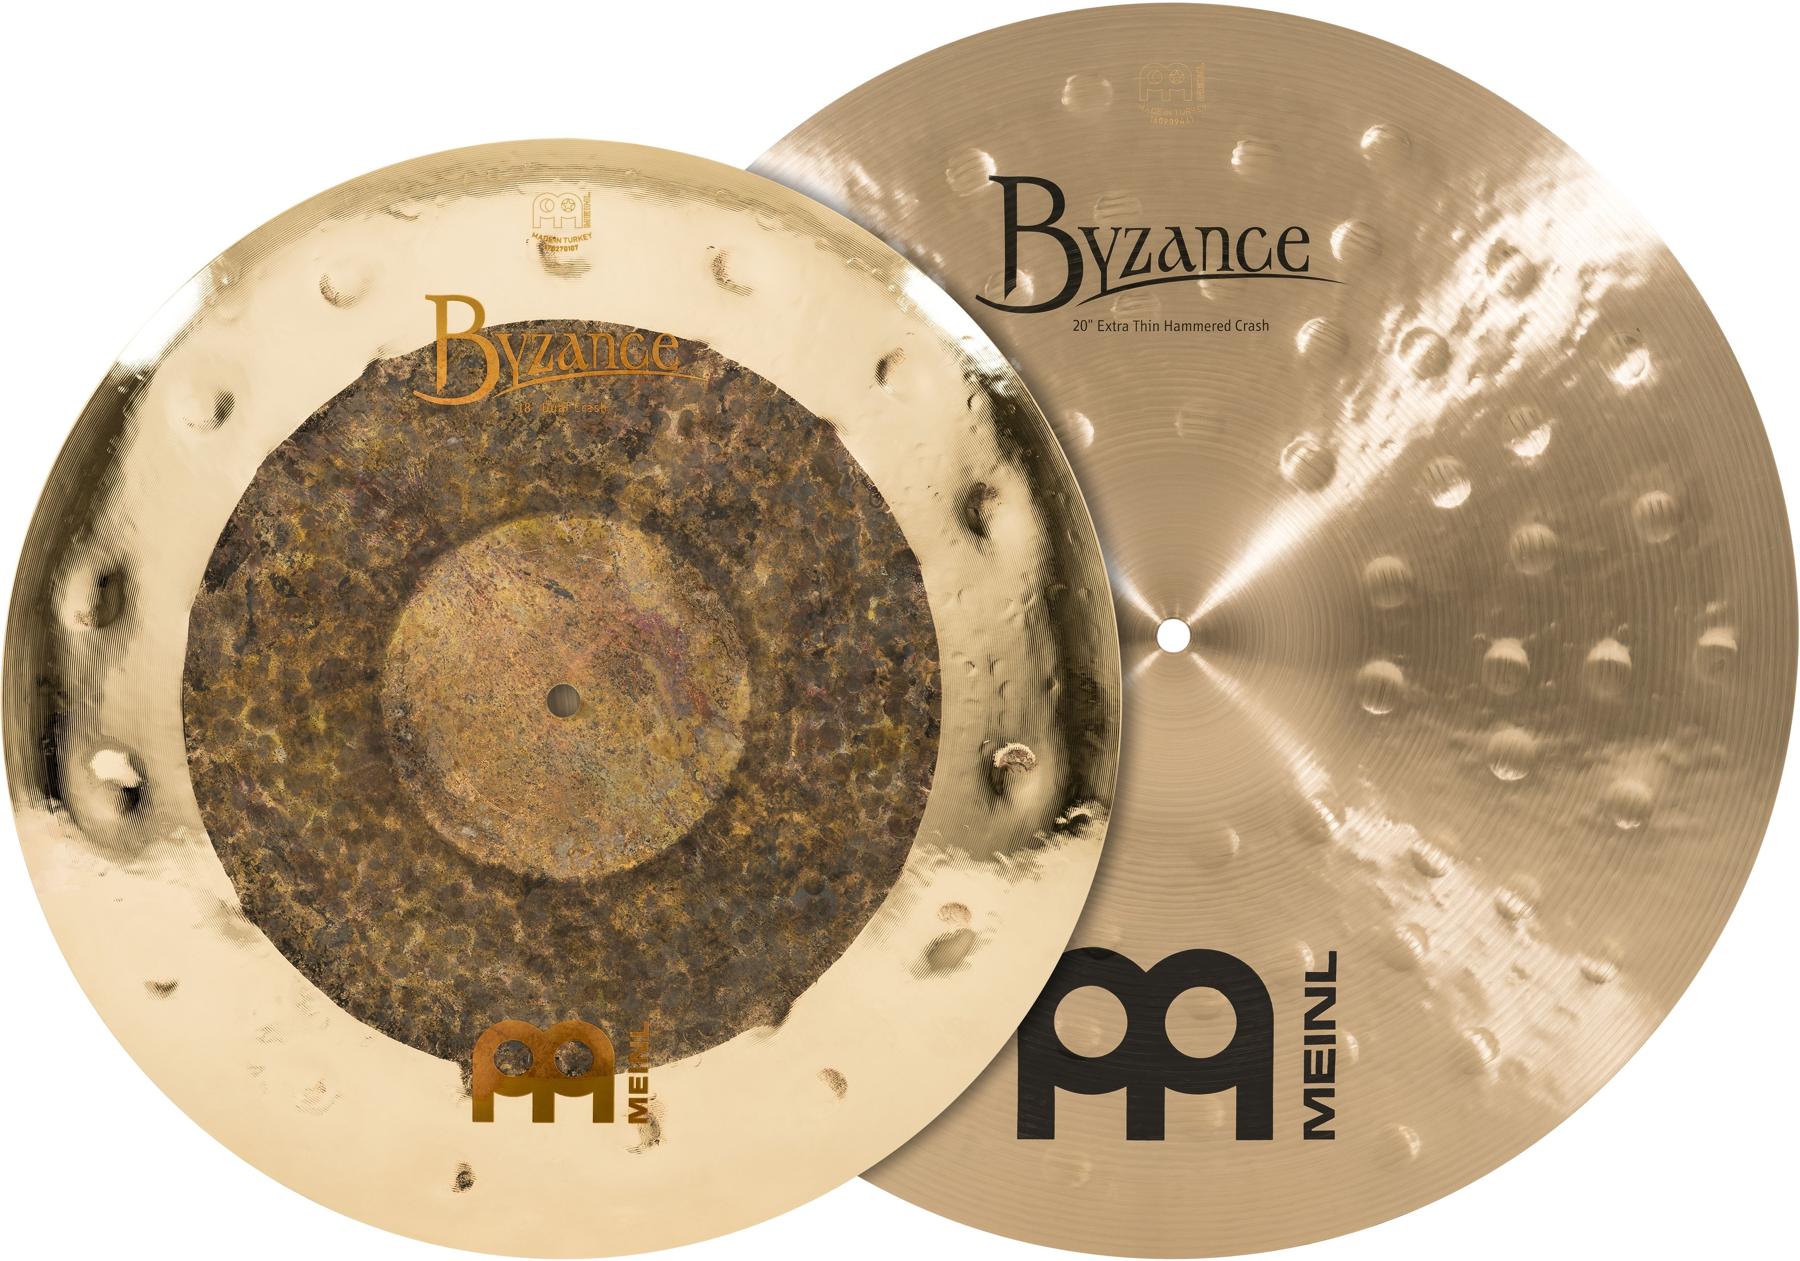 Meinl Cymbals Byzance Mixed Crash Pack - 18 inch Dual and 20 inch, Raw/Brilliant and Extra Thin Hammered Traditional